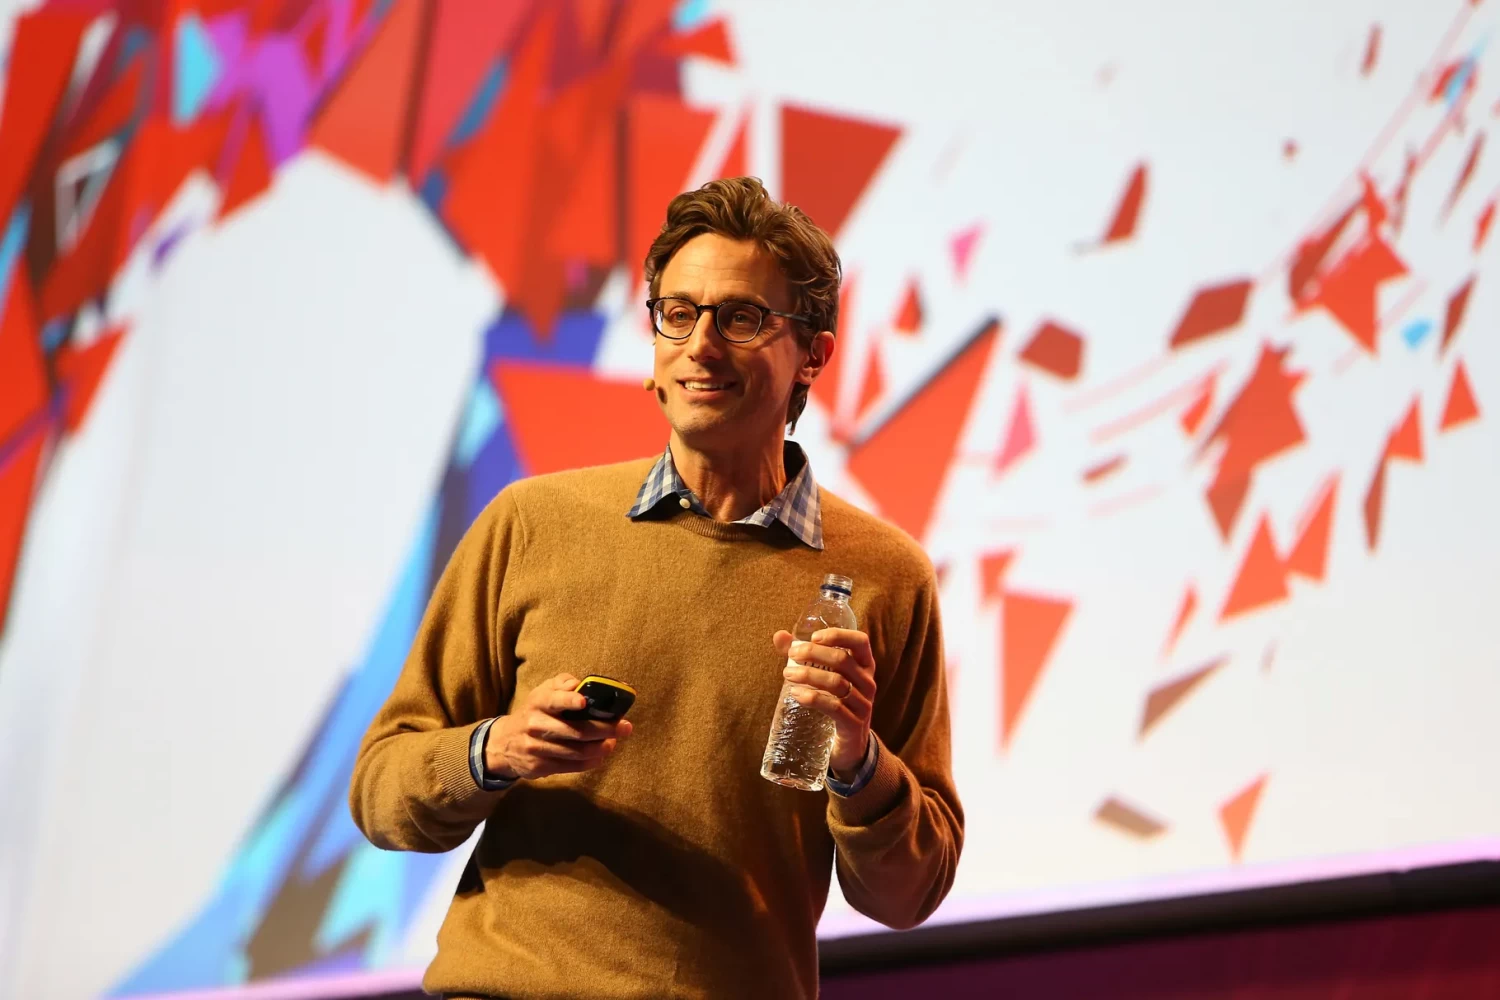 BuzzFeed founder and CEO Jonah Peretti in 2016, around the time of the media company’s peak. AOP.Press/Corbis via Getty Images